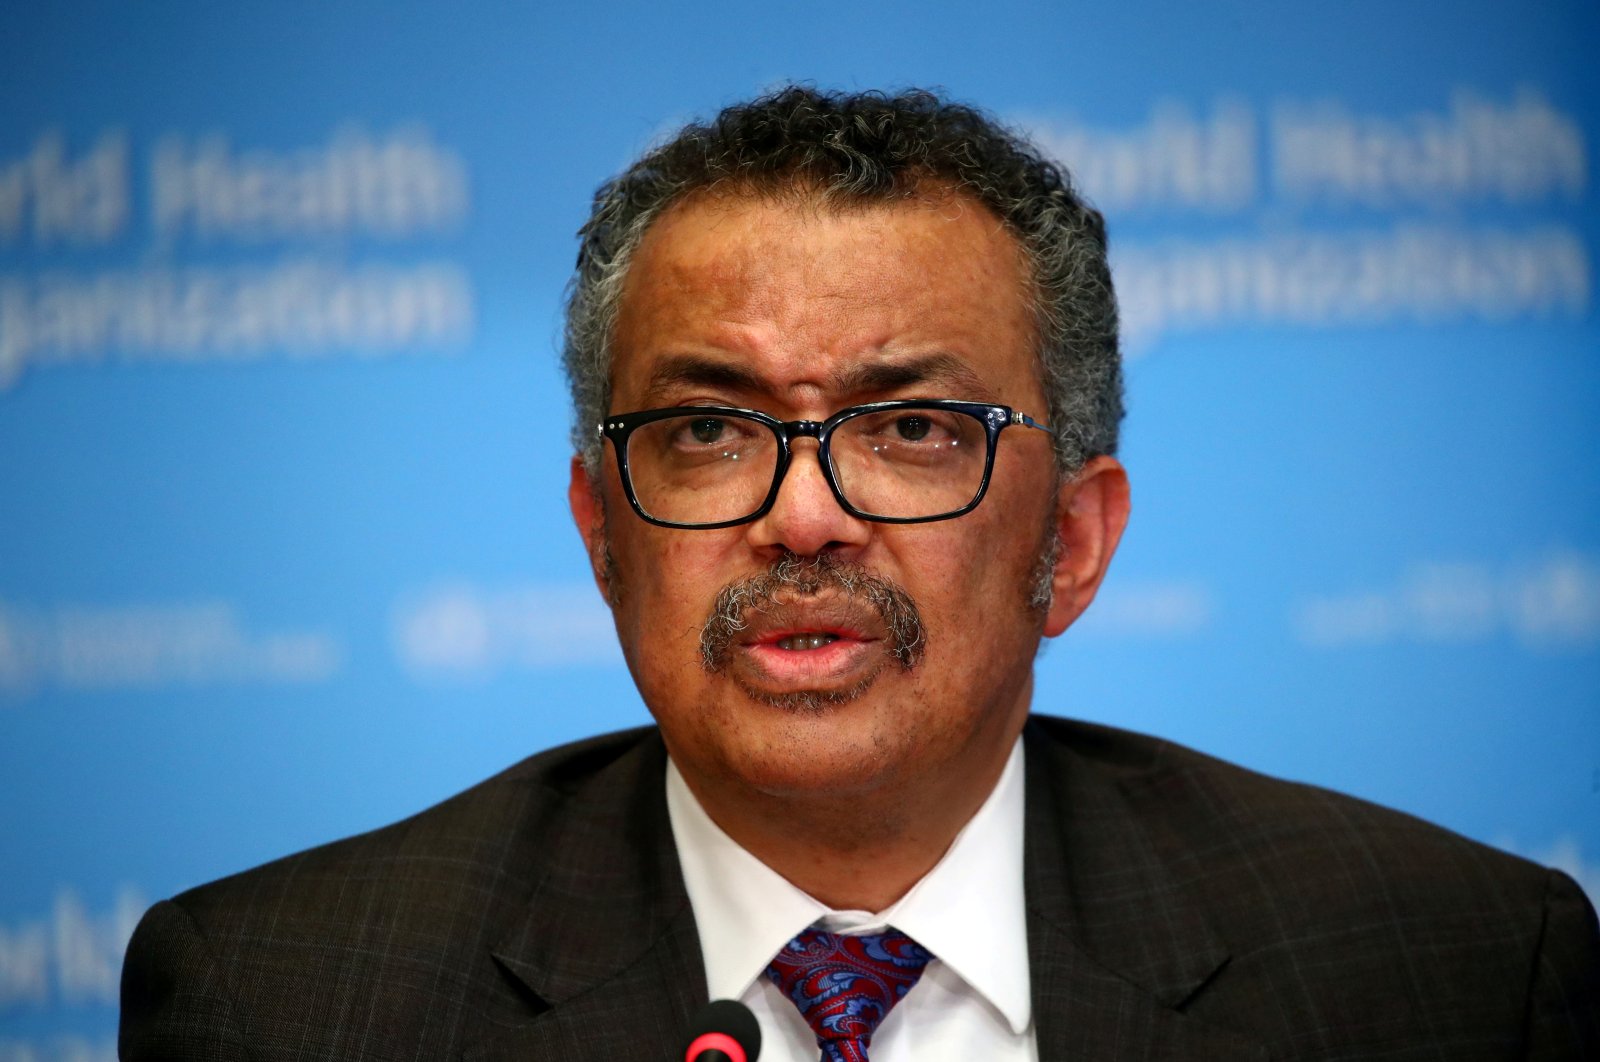 Director-General of the World Health Organization (WHO) Tedros Adhanom Ghebreyesus speaks during a news conference on the situation of the coronavirus pandemic, Geneva, Switzerland, Feb. 28, 2020. (Reuters Photo)